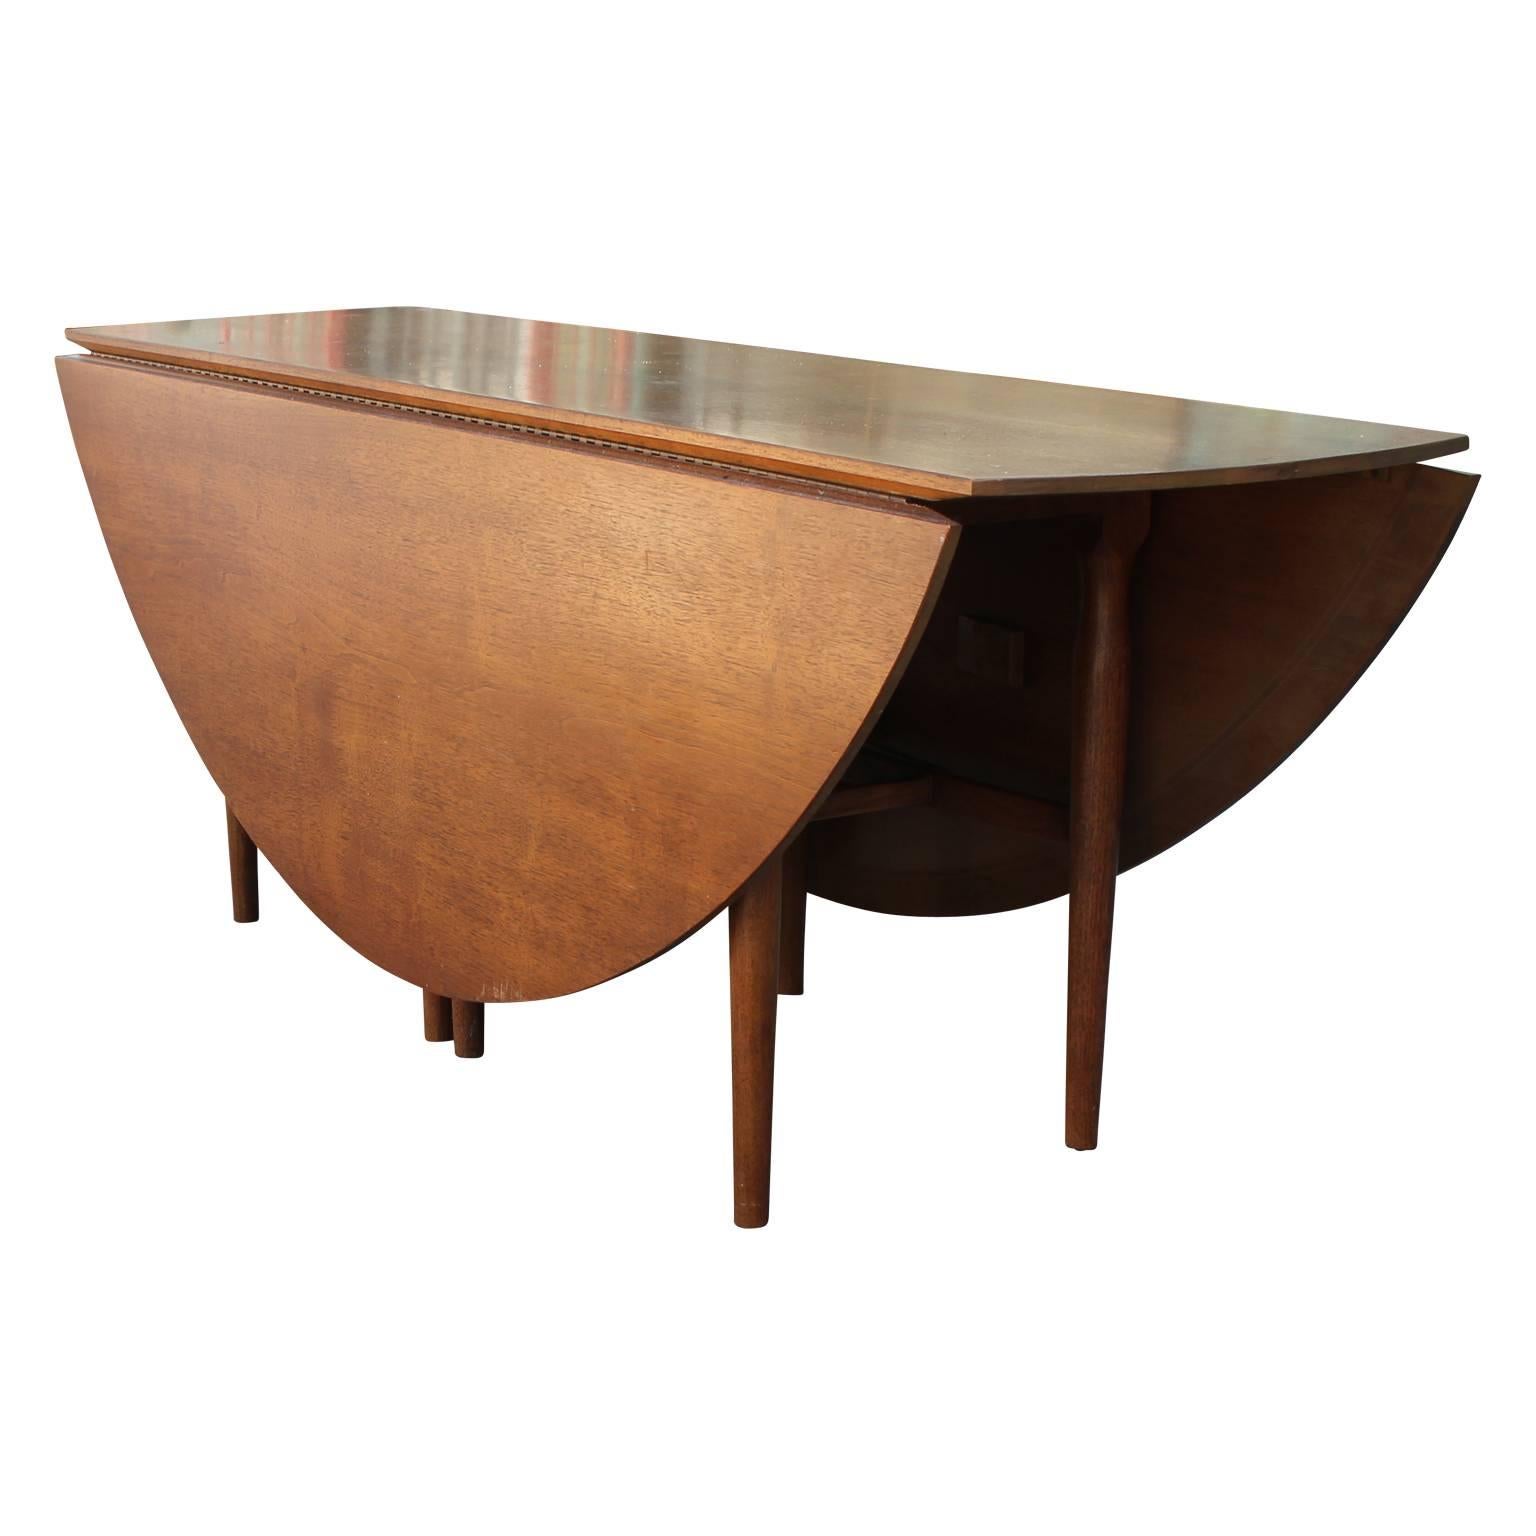 Modern drop-leaf gate leg serving table by Henredon. Perfect to go behind a couch and can be expanded to use as a serving table or game table. In good condition. Dimensions are taken when fully expanded.